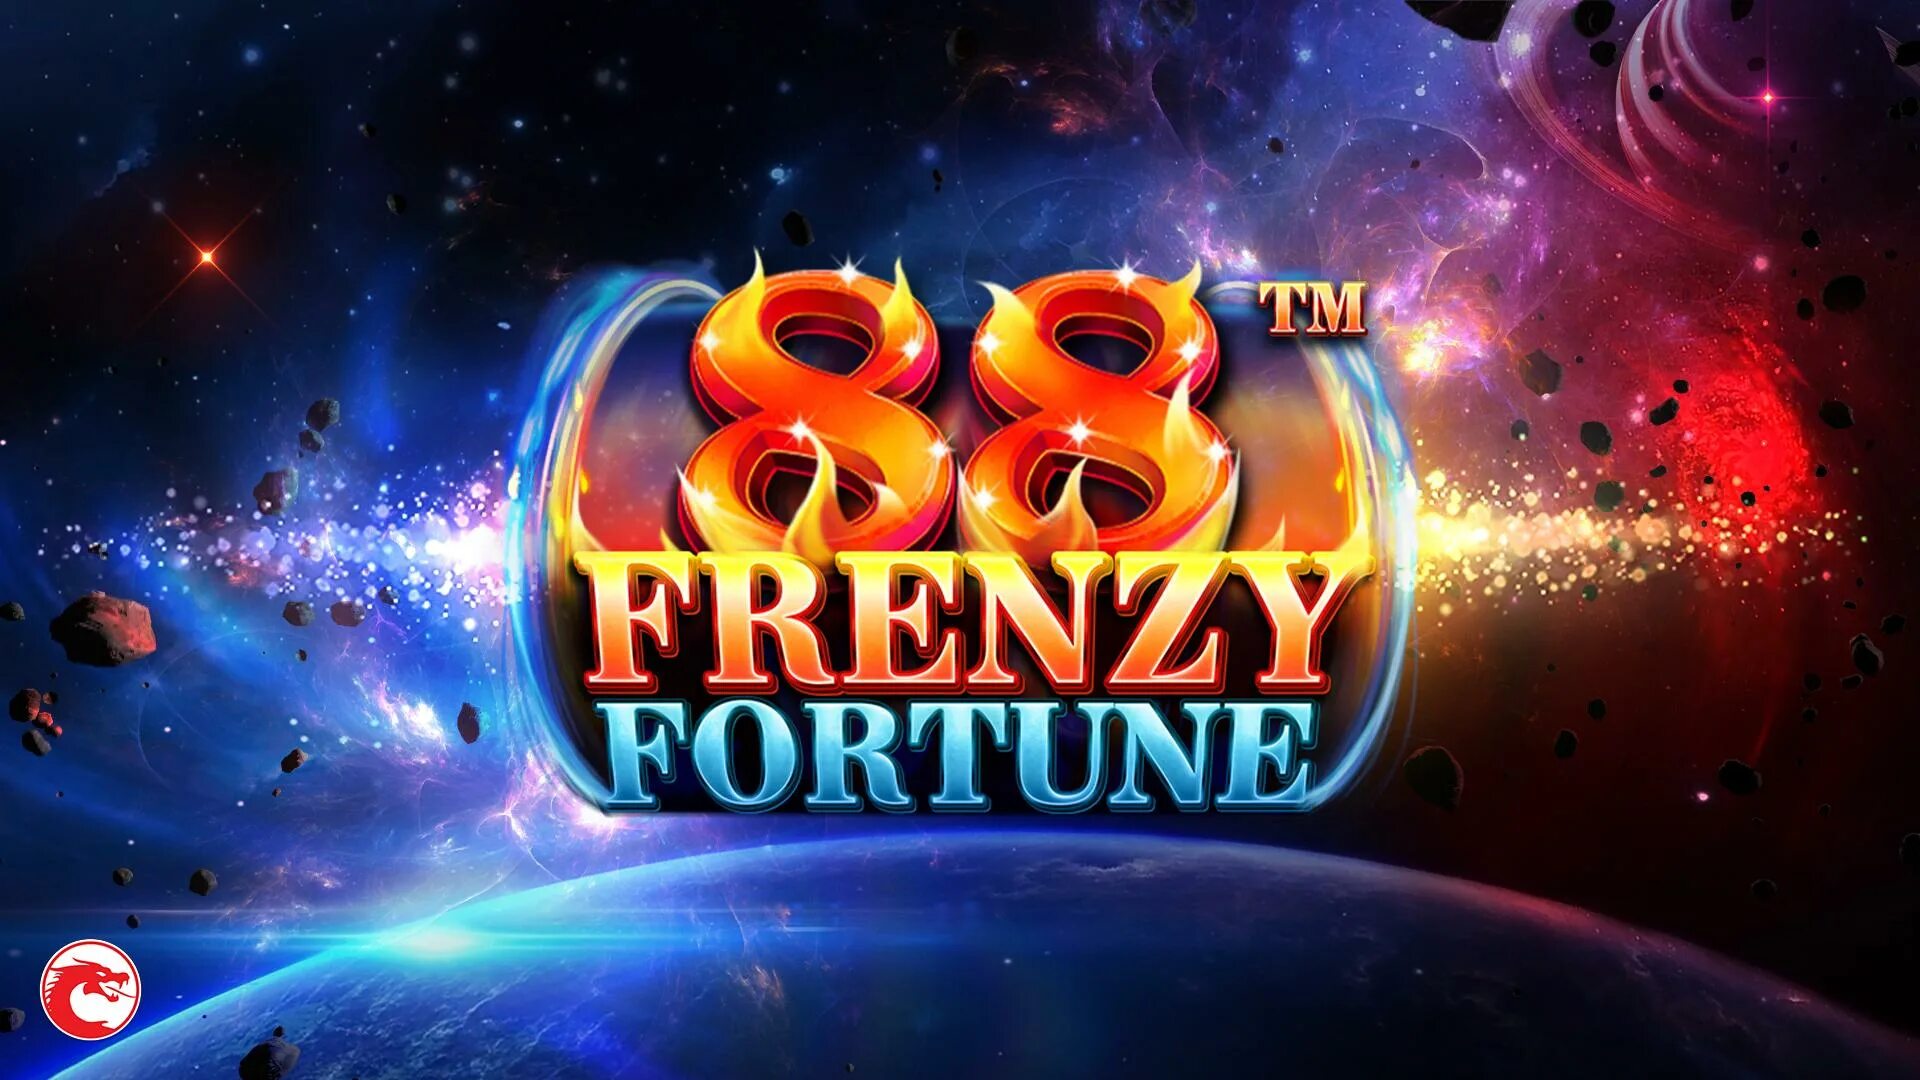 8 00 est. 88 Frenzy Fortune. Слот 7 Fortune Frenzy. Fortune Frenzy казино. Betsoft Gaming.